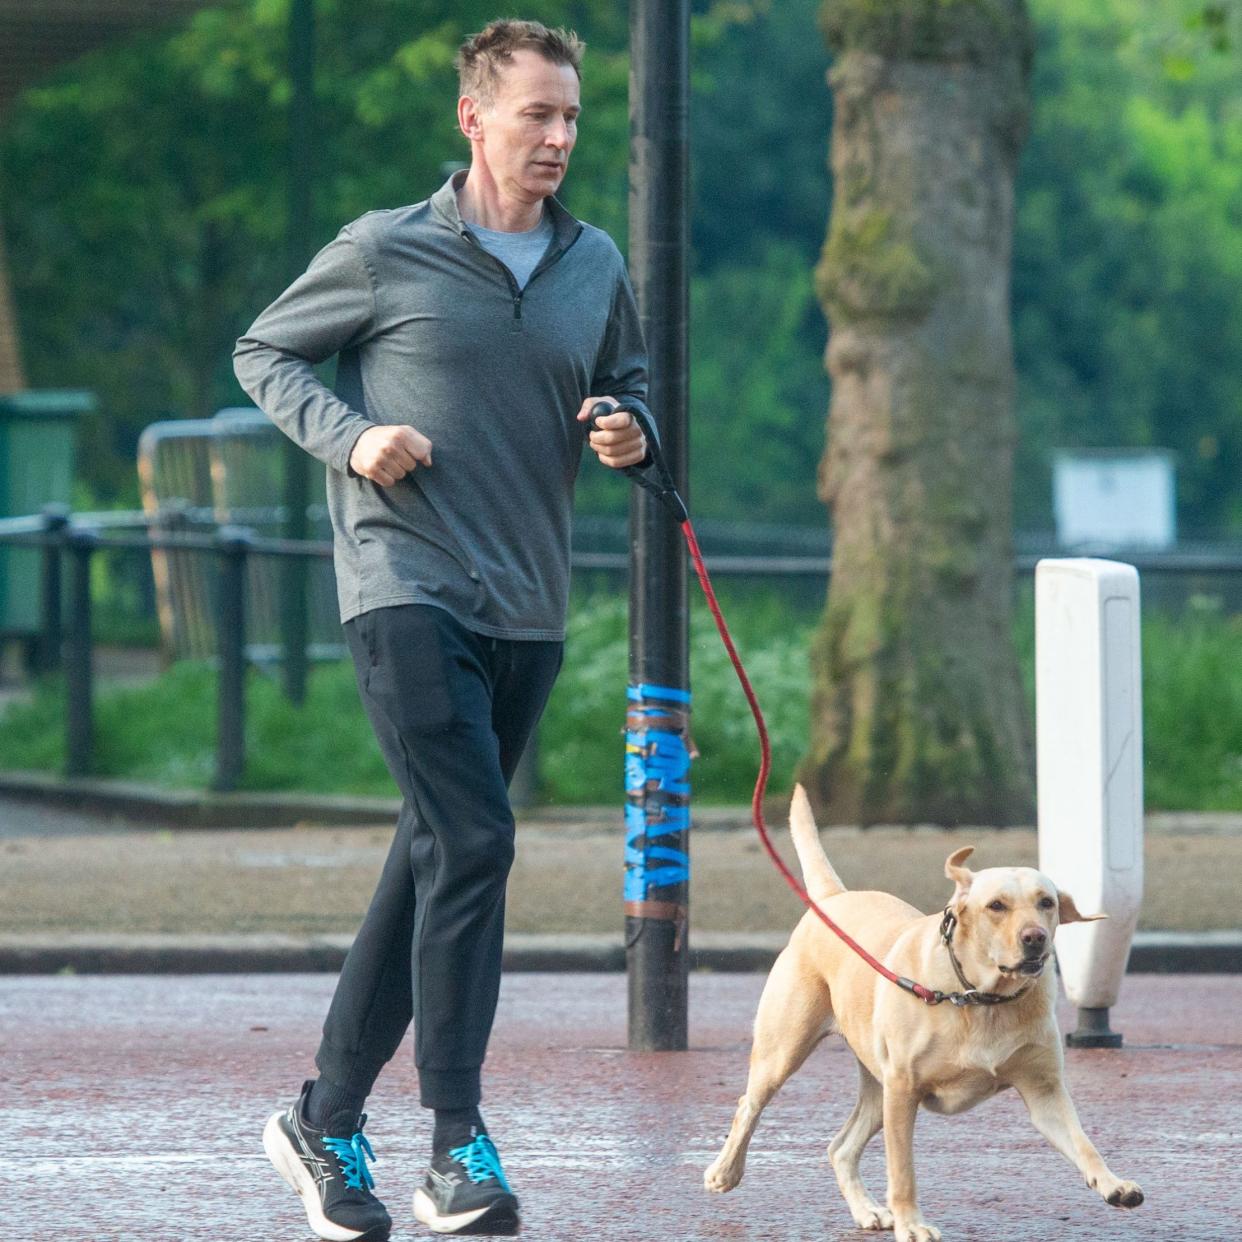 Jeremy Hunt, the Chancellor, is pictured in Westminster this morning going for a run with his dog Poppy